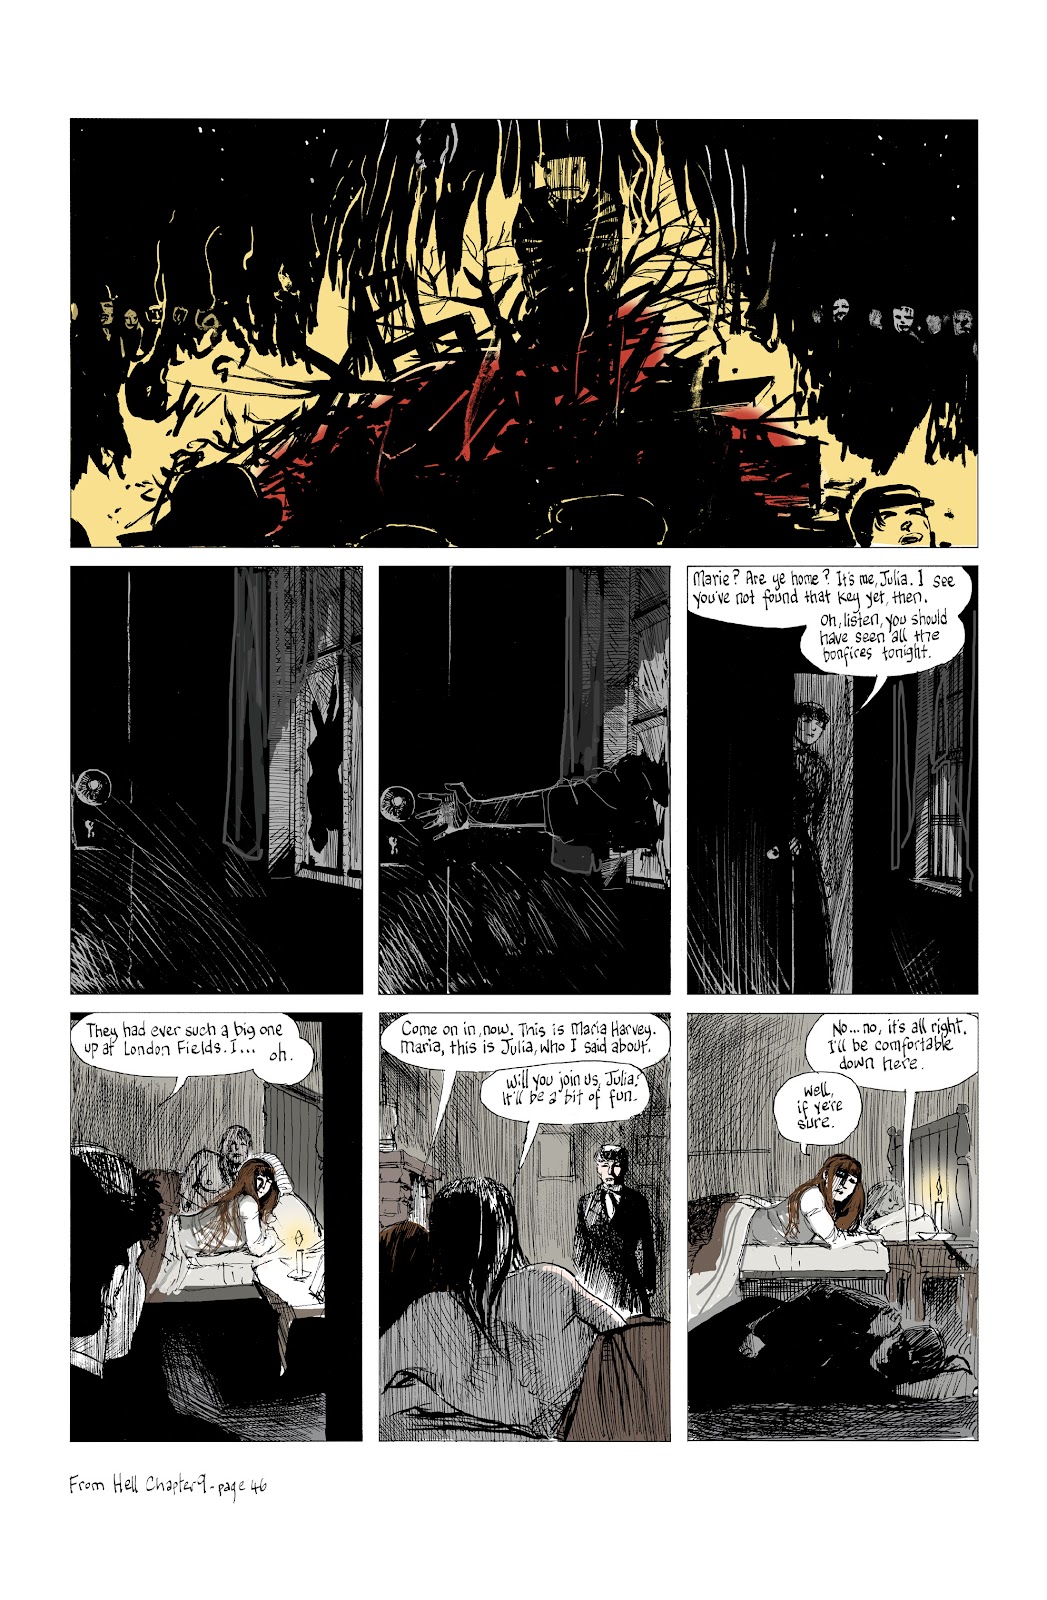 From Hell: Master Edition issue 6 - Page 50